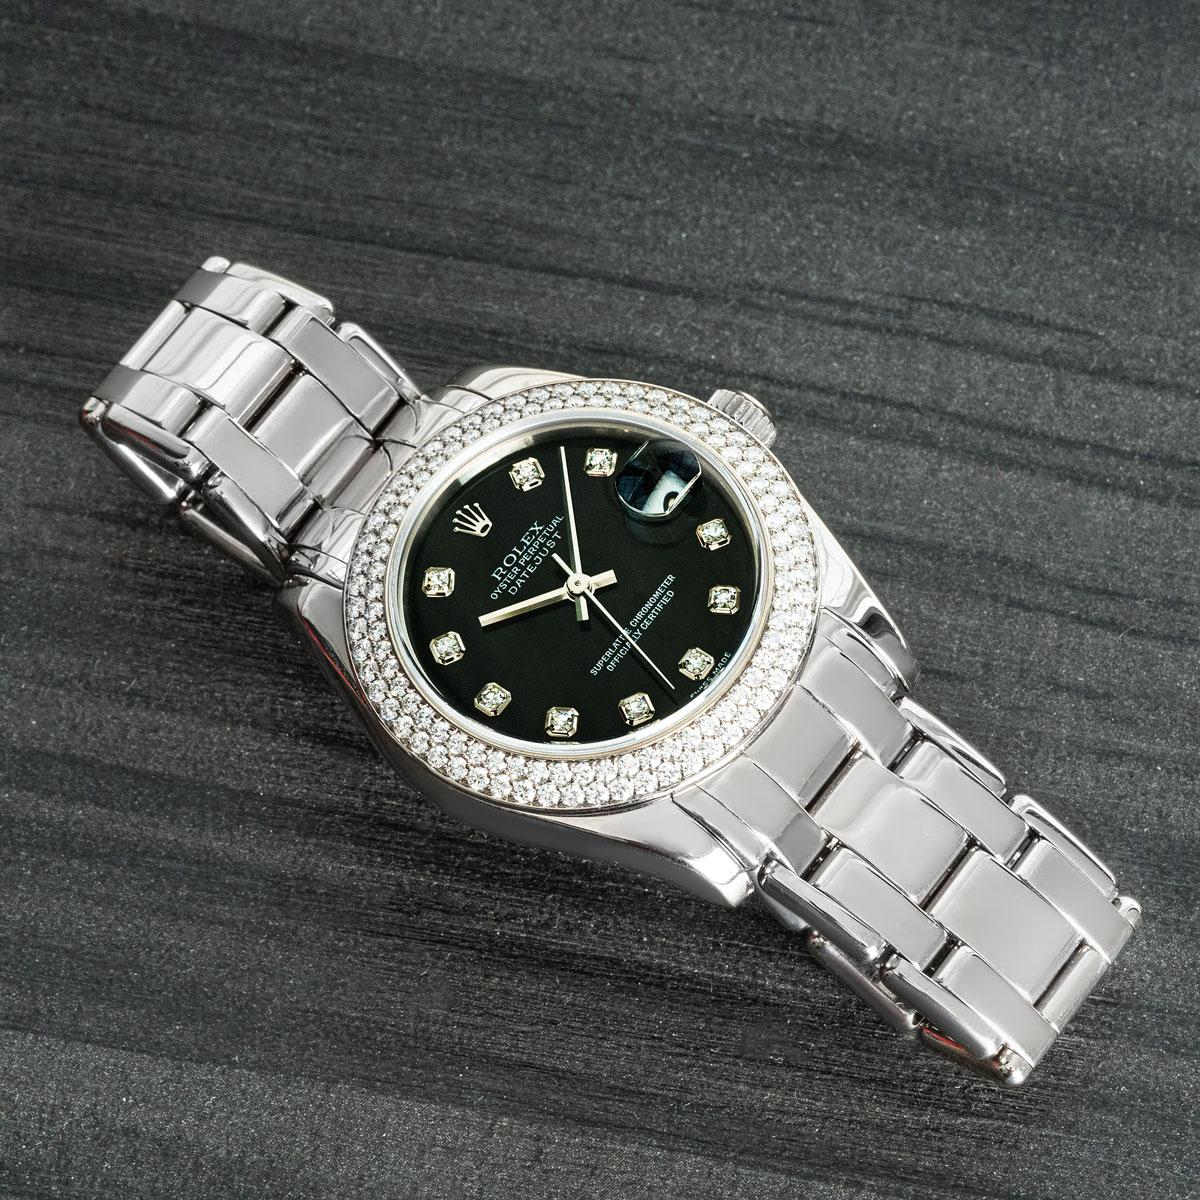 A white gold 34mm Datejust Pearlmaster by Rolex. Features a black diamond dial, complemented by a white gold bezel set with approximately 118 round brilliant cut diamonds. The timepiece is fitted with a sapphire crystal, self-winding automatic